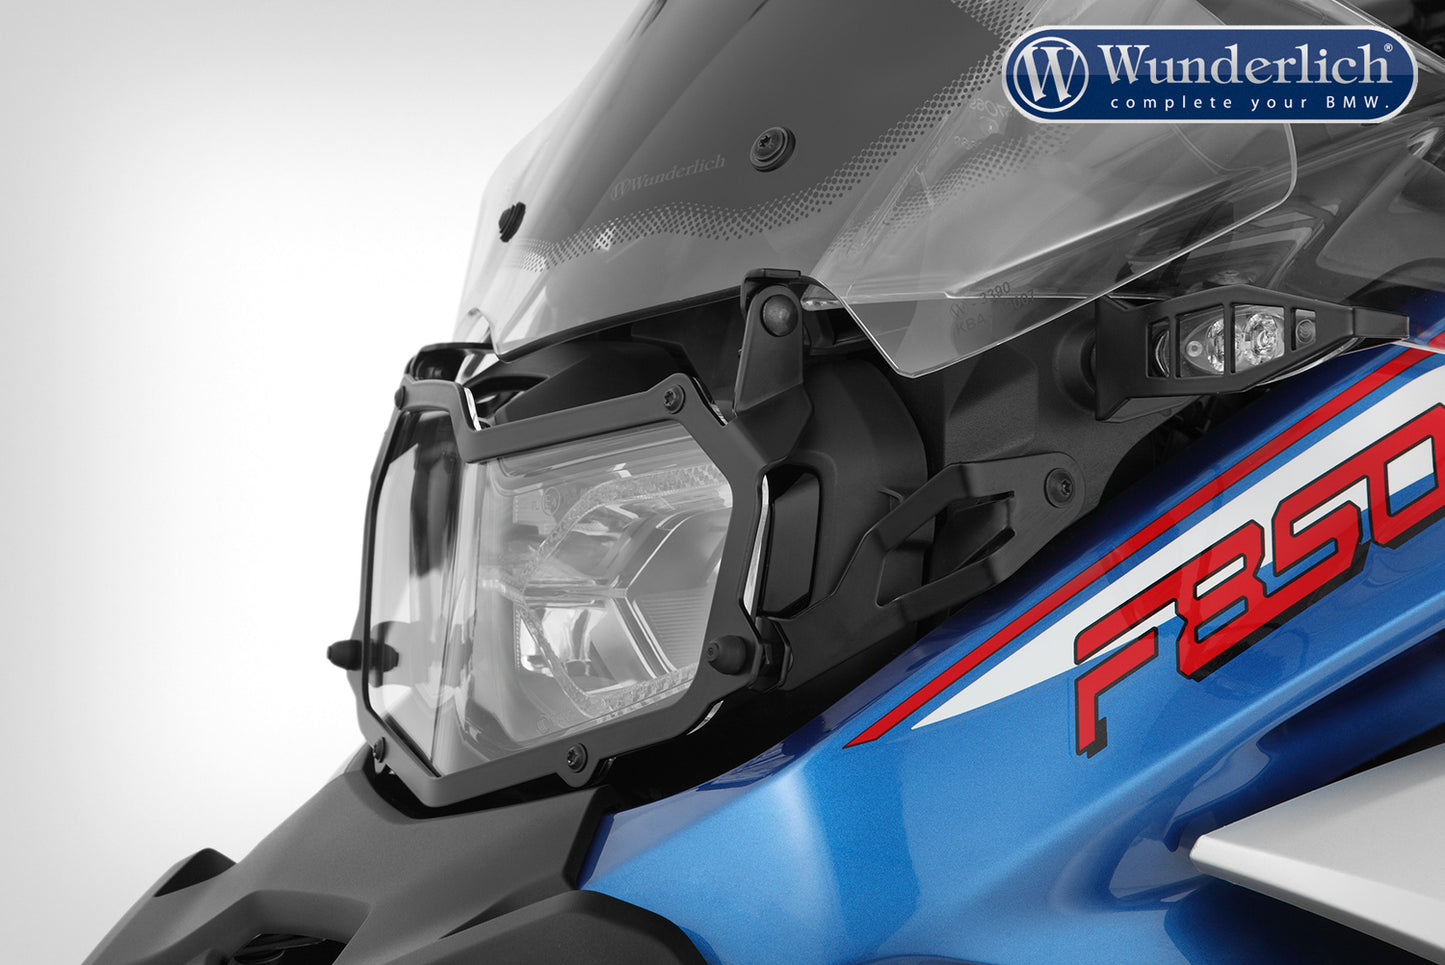 Wunderlich headlight protection grille, foldable, »CLEAR« for F850 GS - black